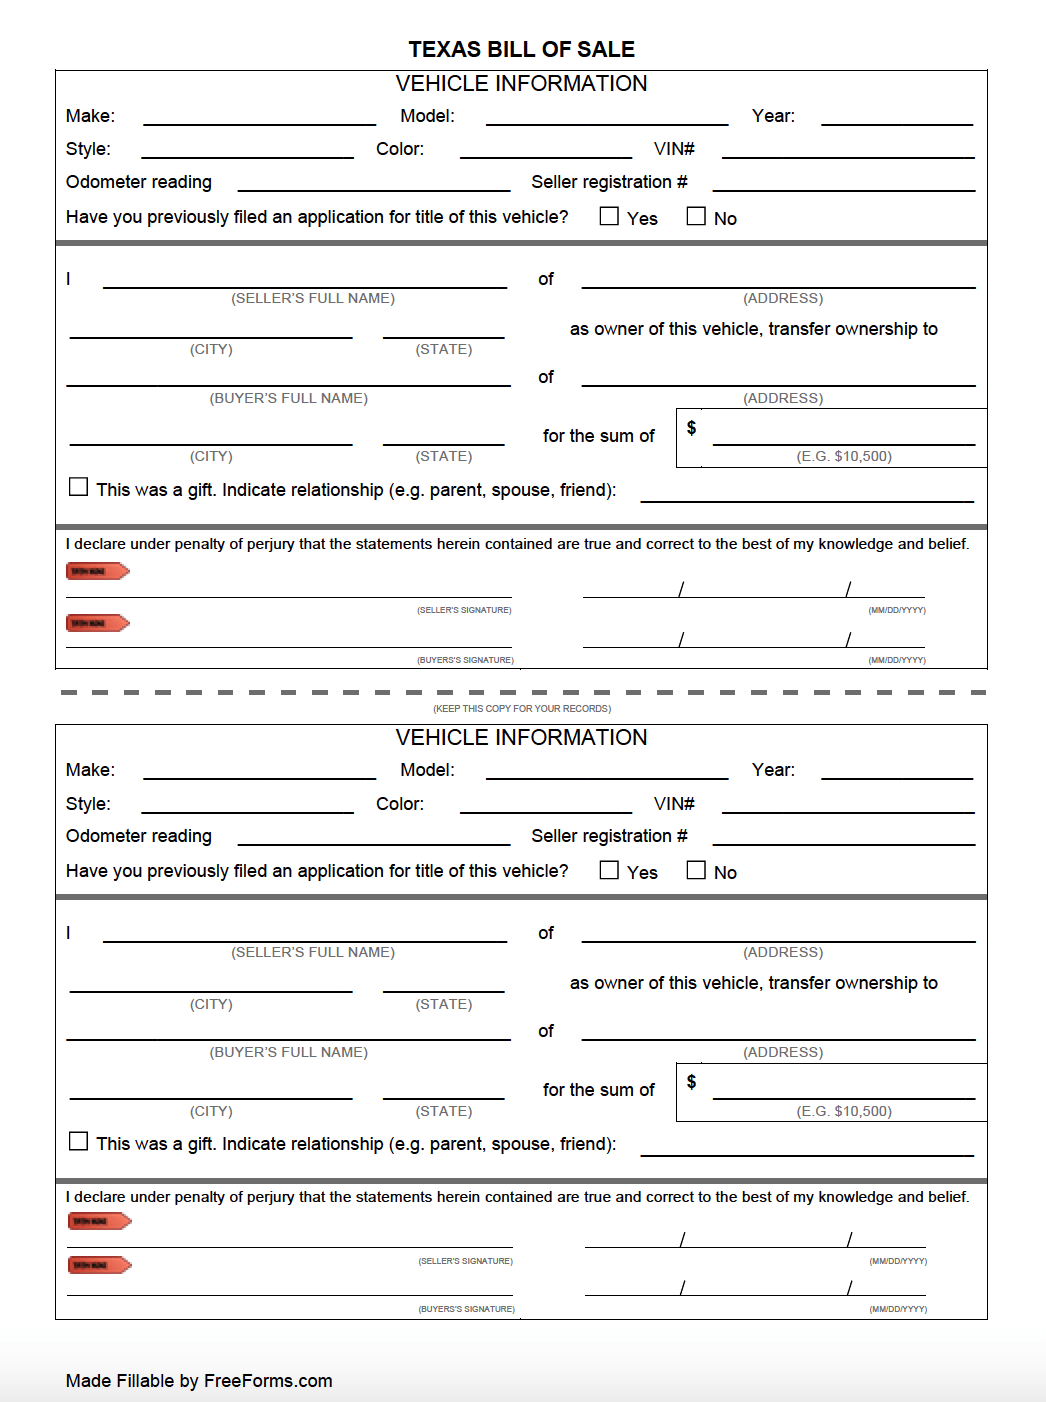 Used Car Bill Of Sales Template from freeforms.com